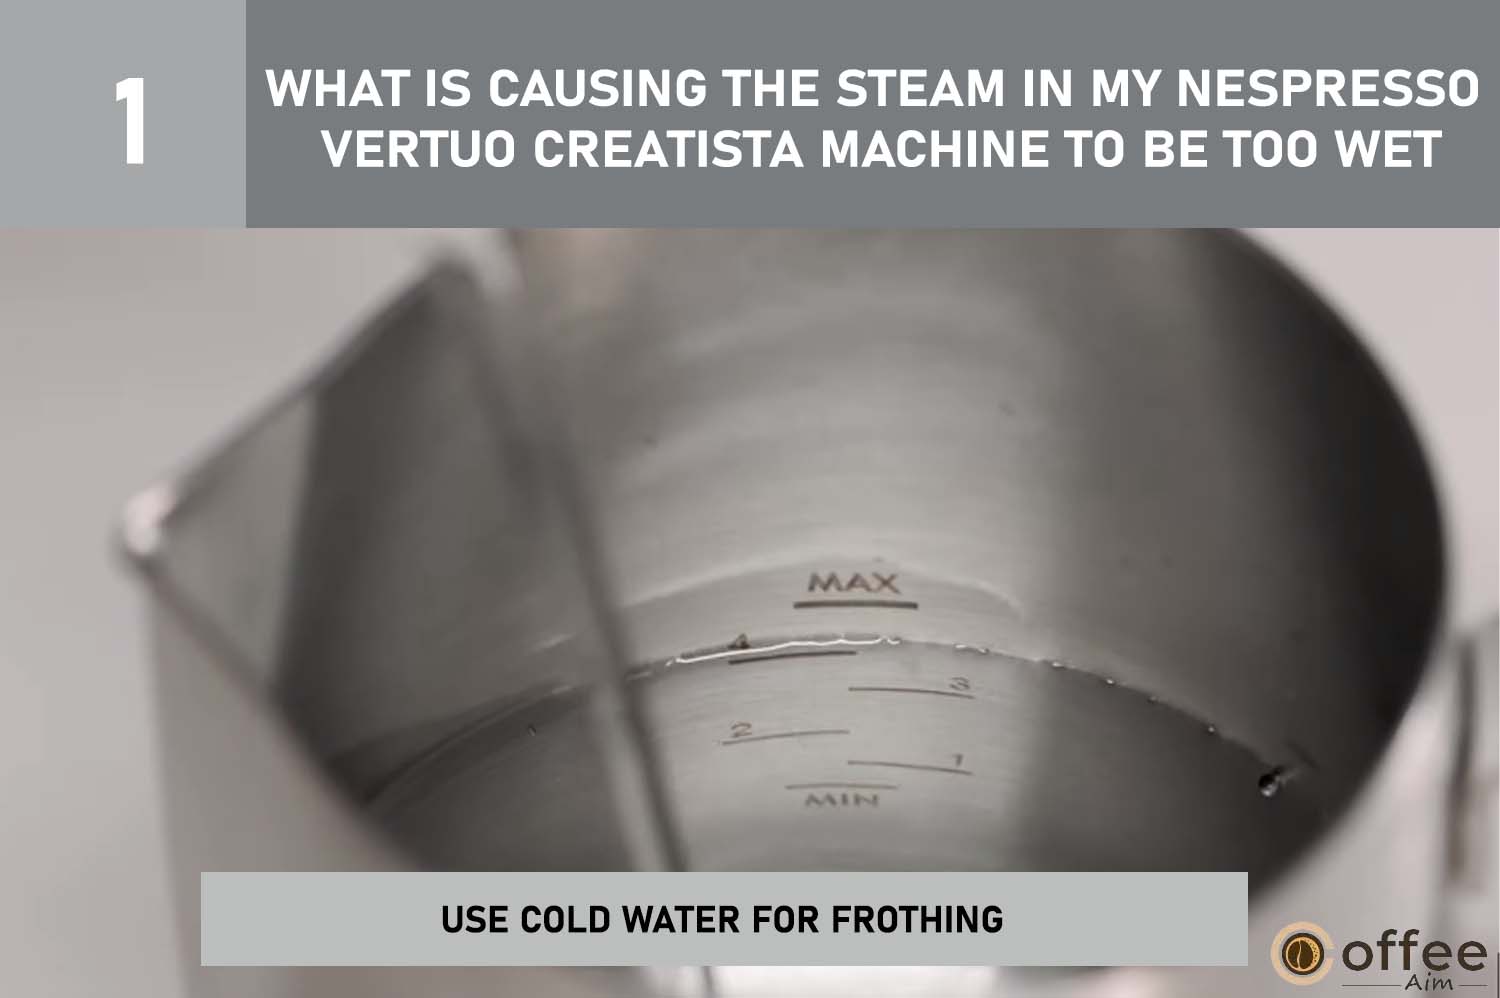 To prevent excess steam in your Nespresso Vertuo Creatista, use cold water when frothing. Follow these steps for better performance.




